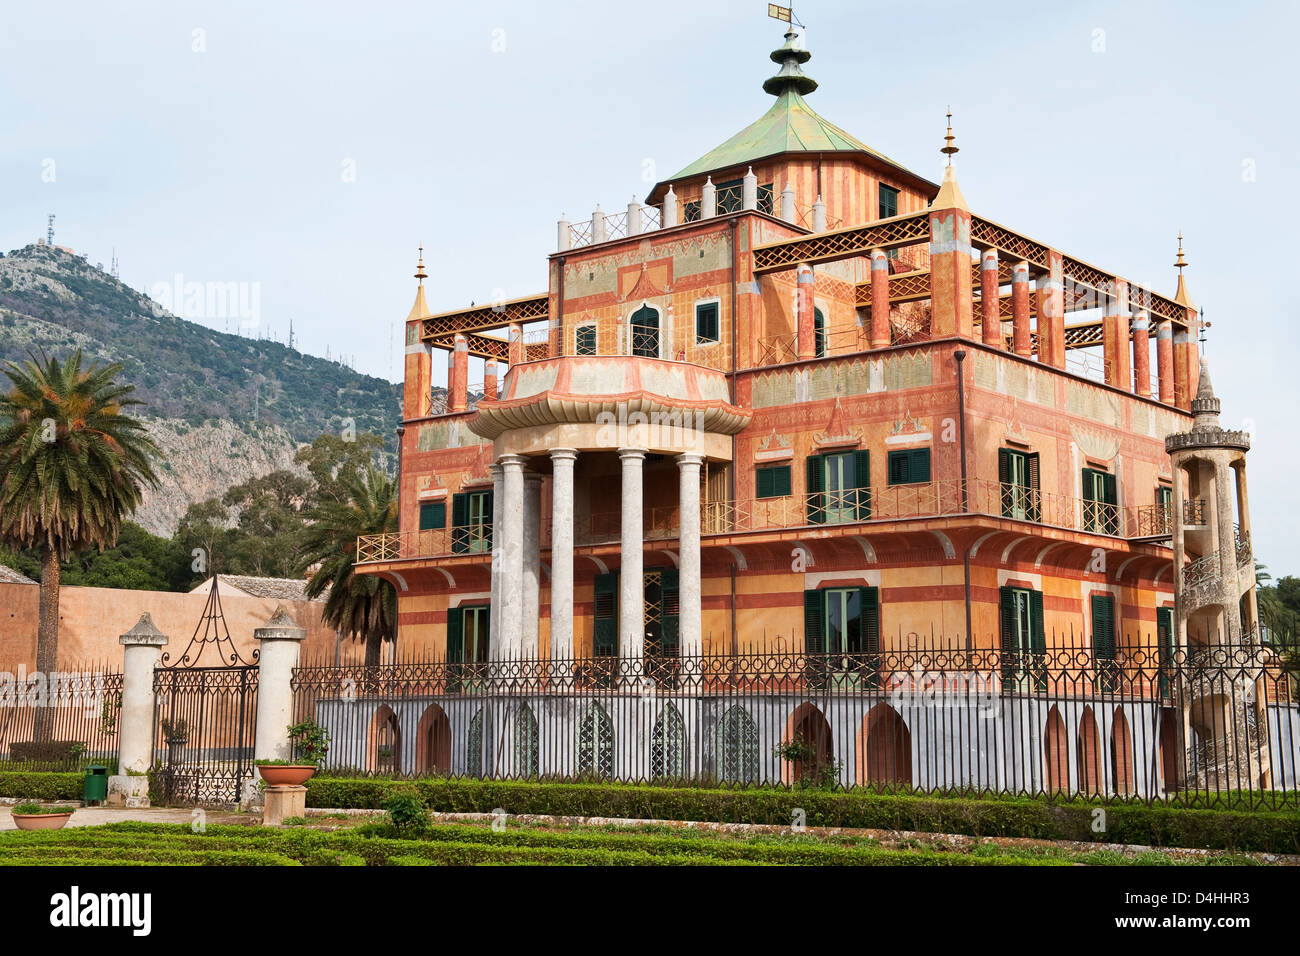 The Palazzina Cinese (Chinese Palace), Palermo, Sicily, Italy, was built in the 'Oriental' style in 1799 for the ruling Bourbon family Stock Photo